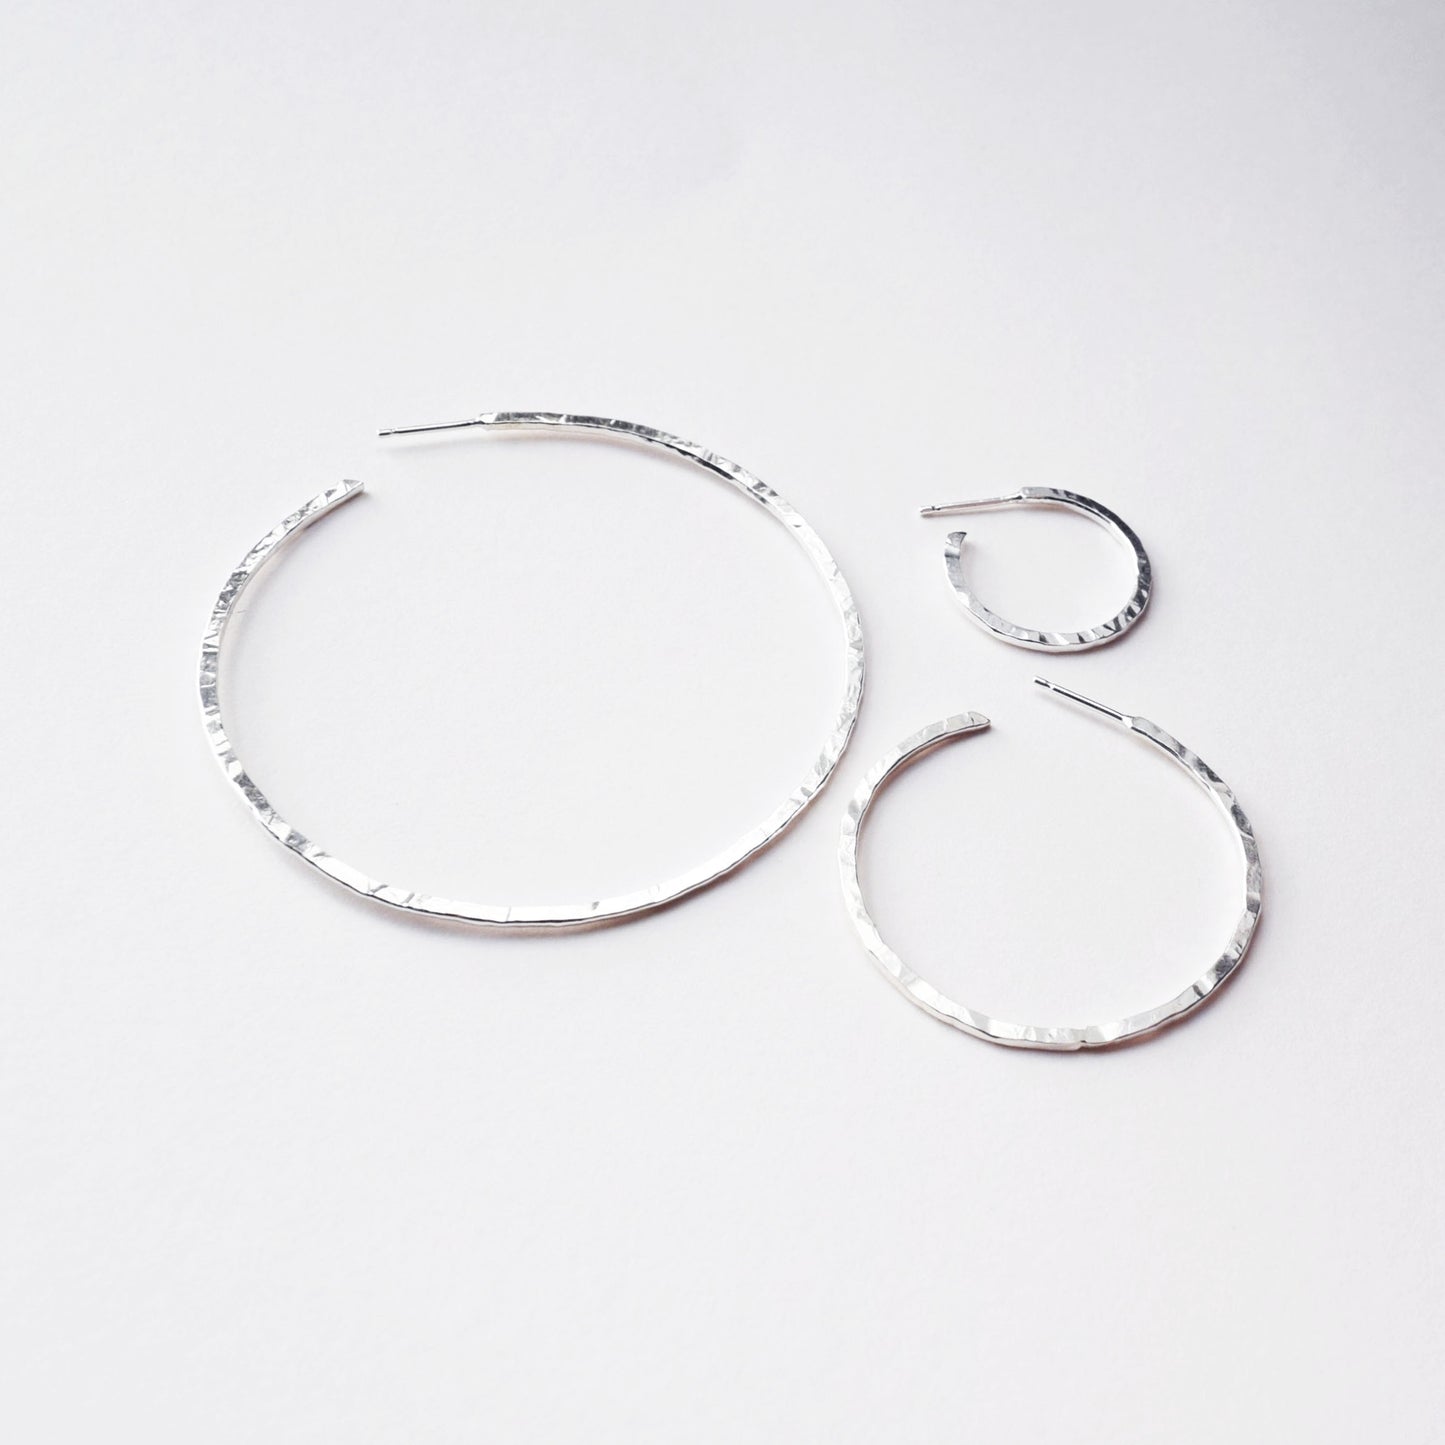 Large Silver Hoops